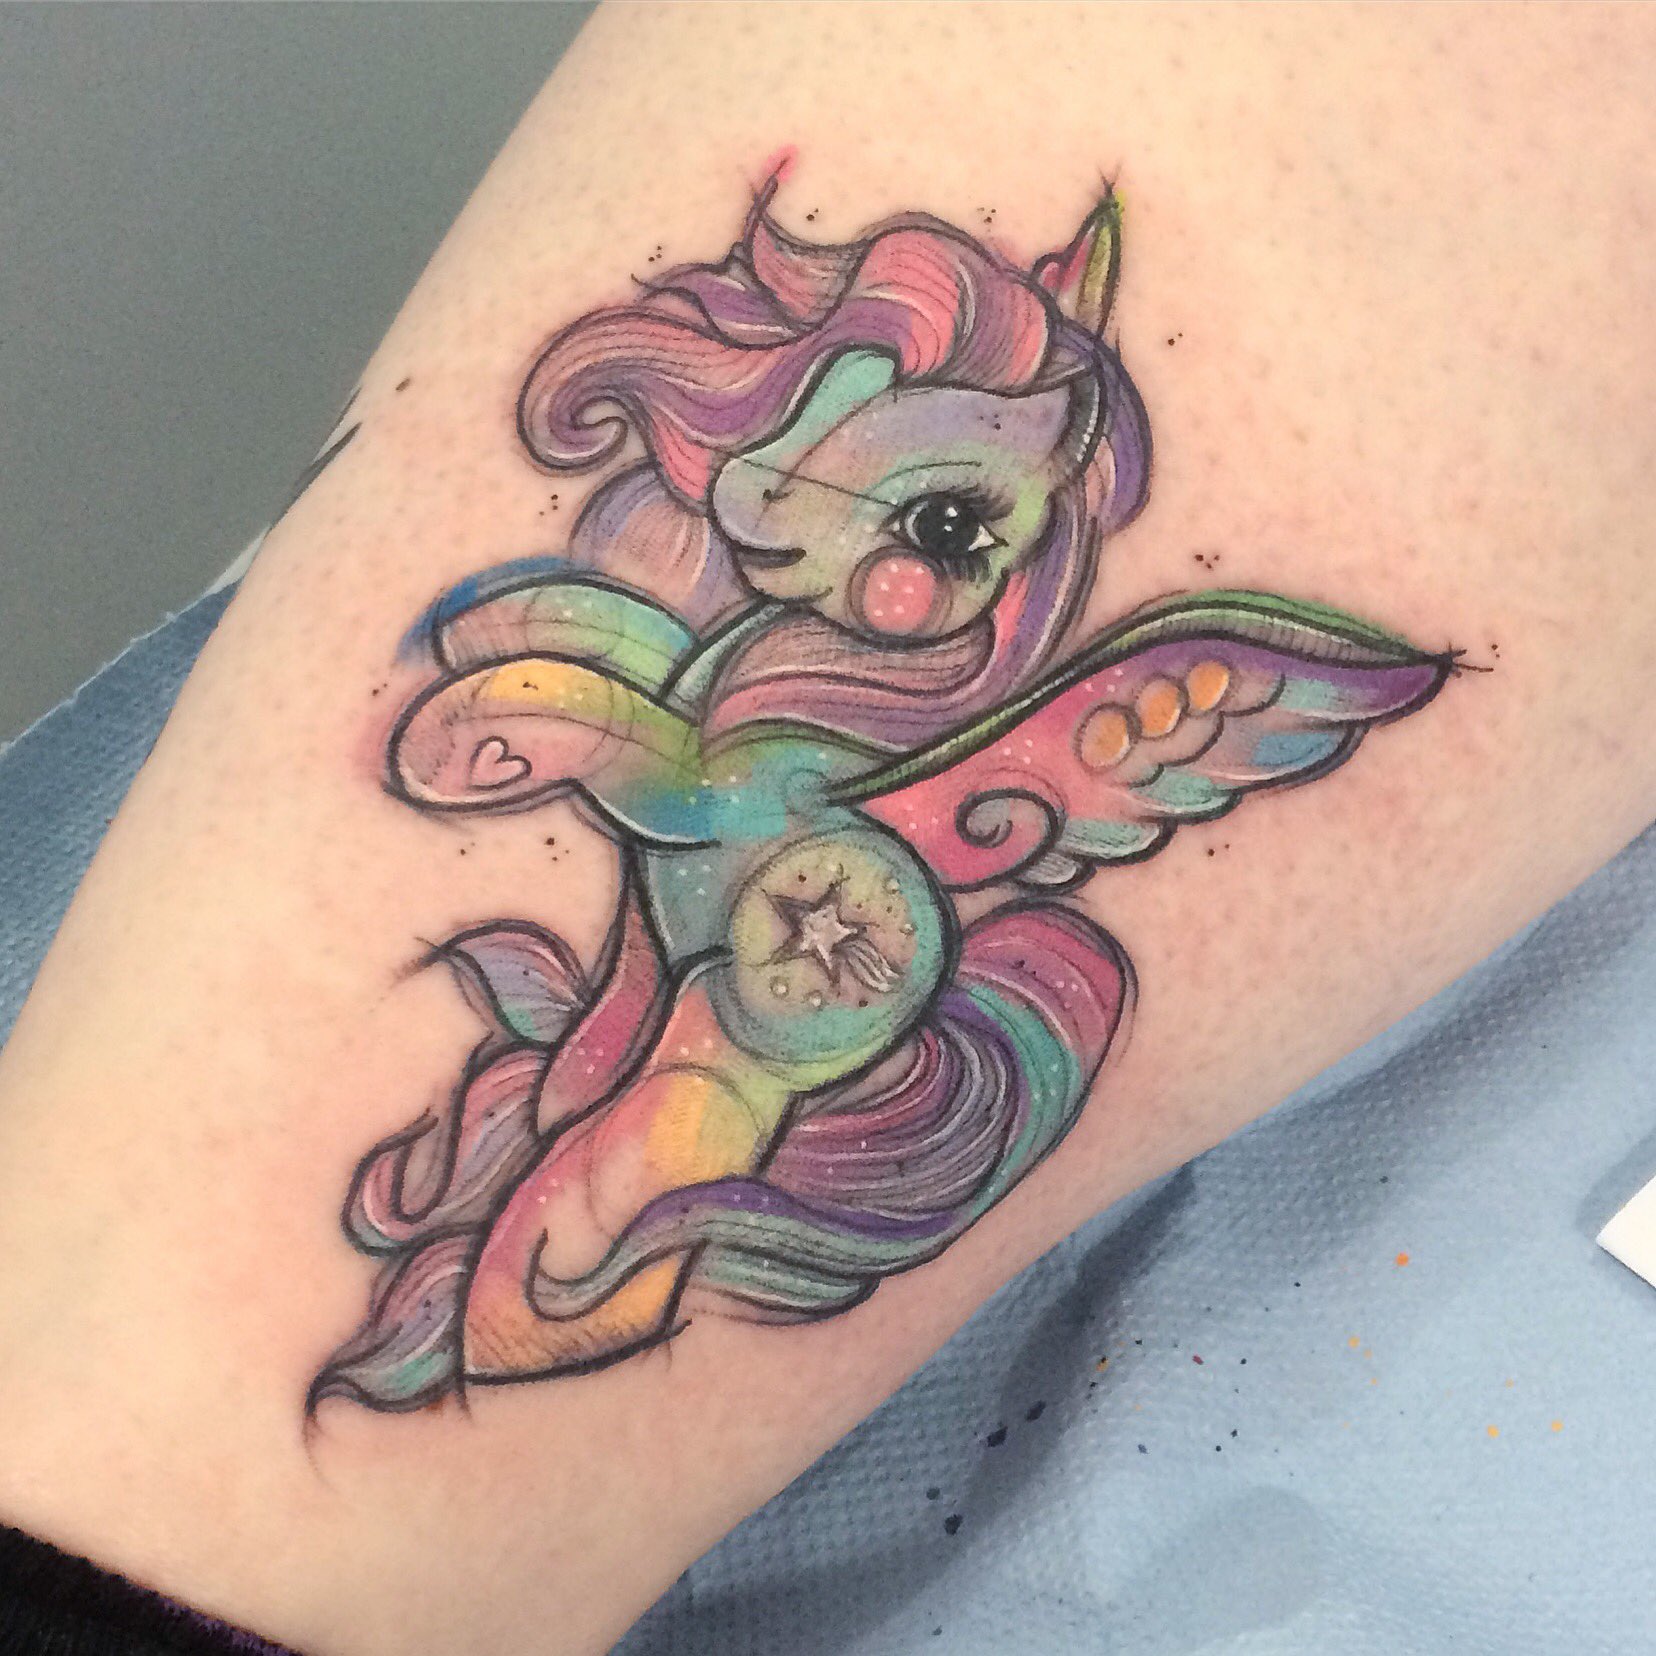 My Little Pony Tattoo Designs And MeaningsMy Little Pony Tattoo Ideas And  Pictures  HubPages